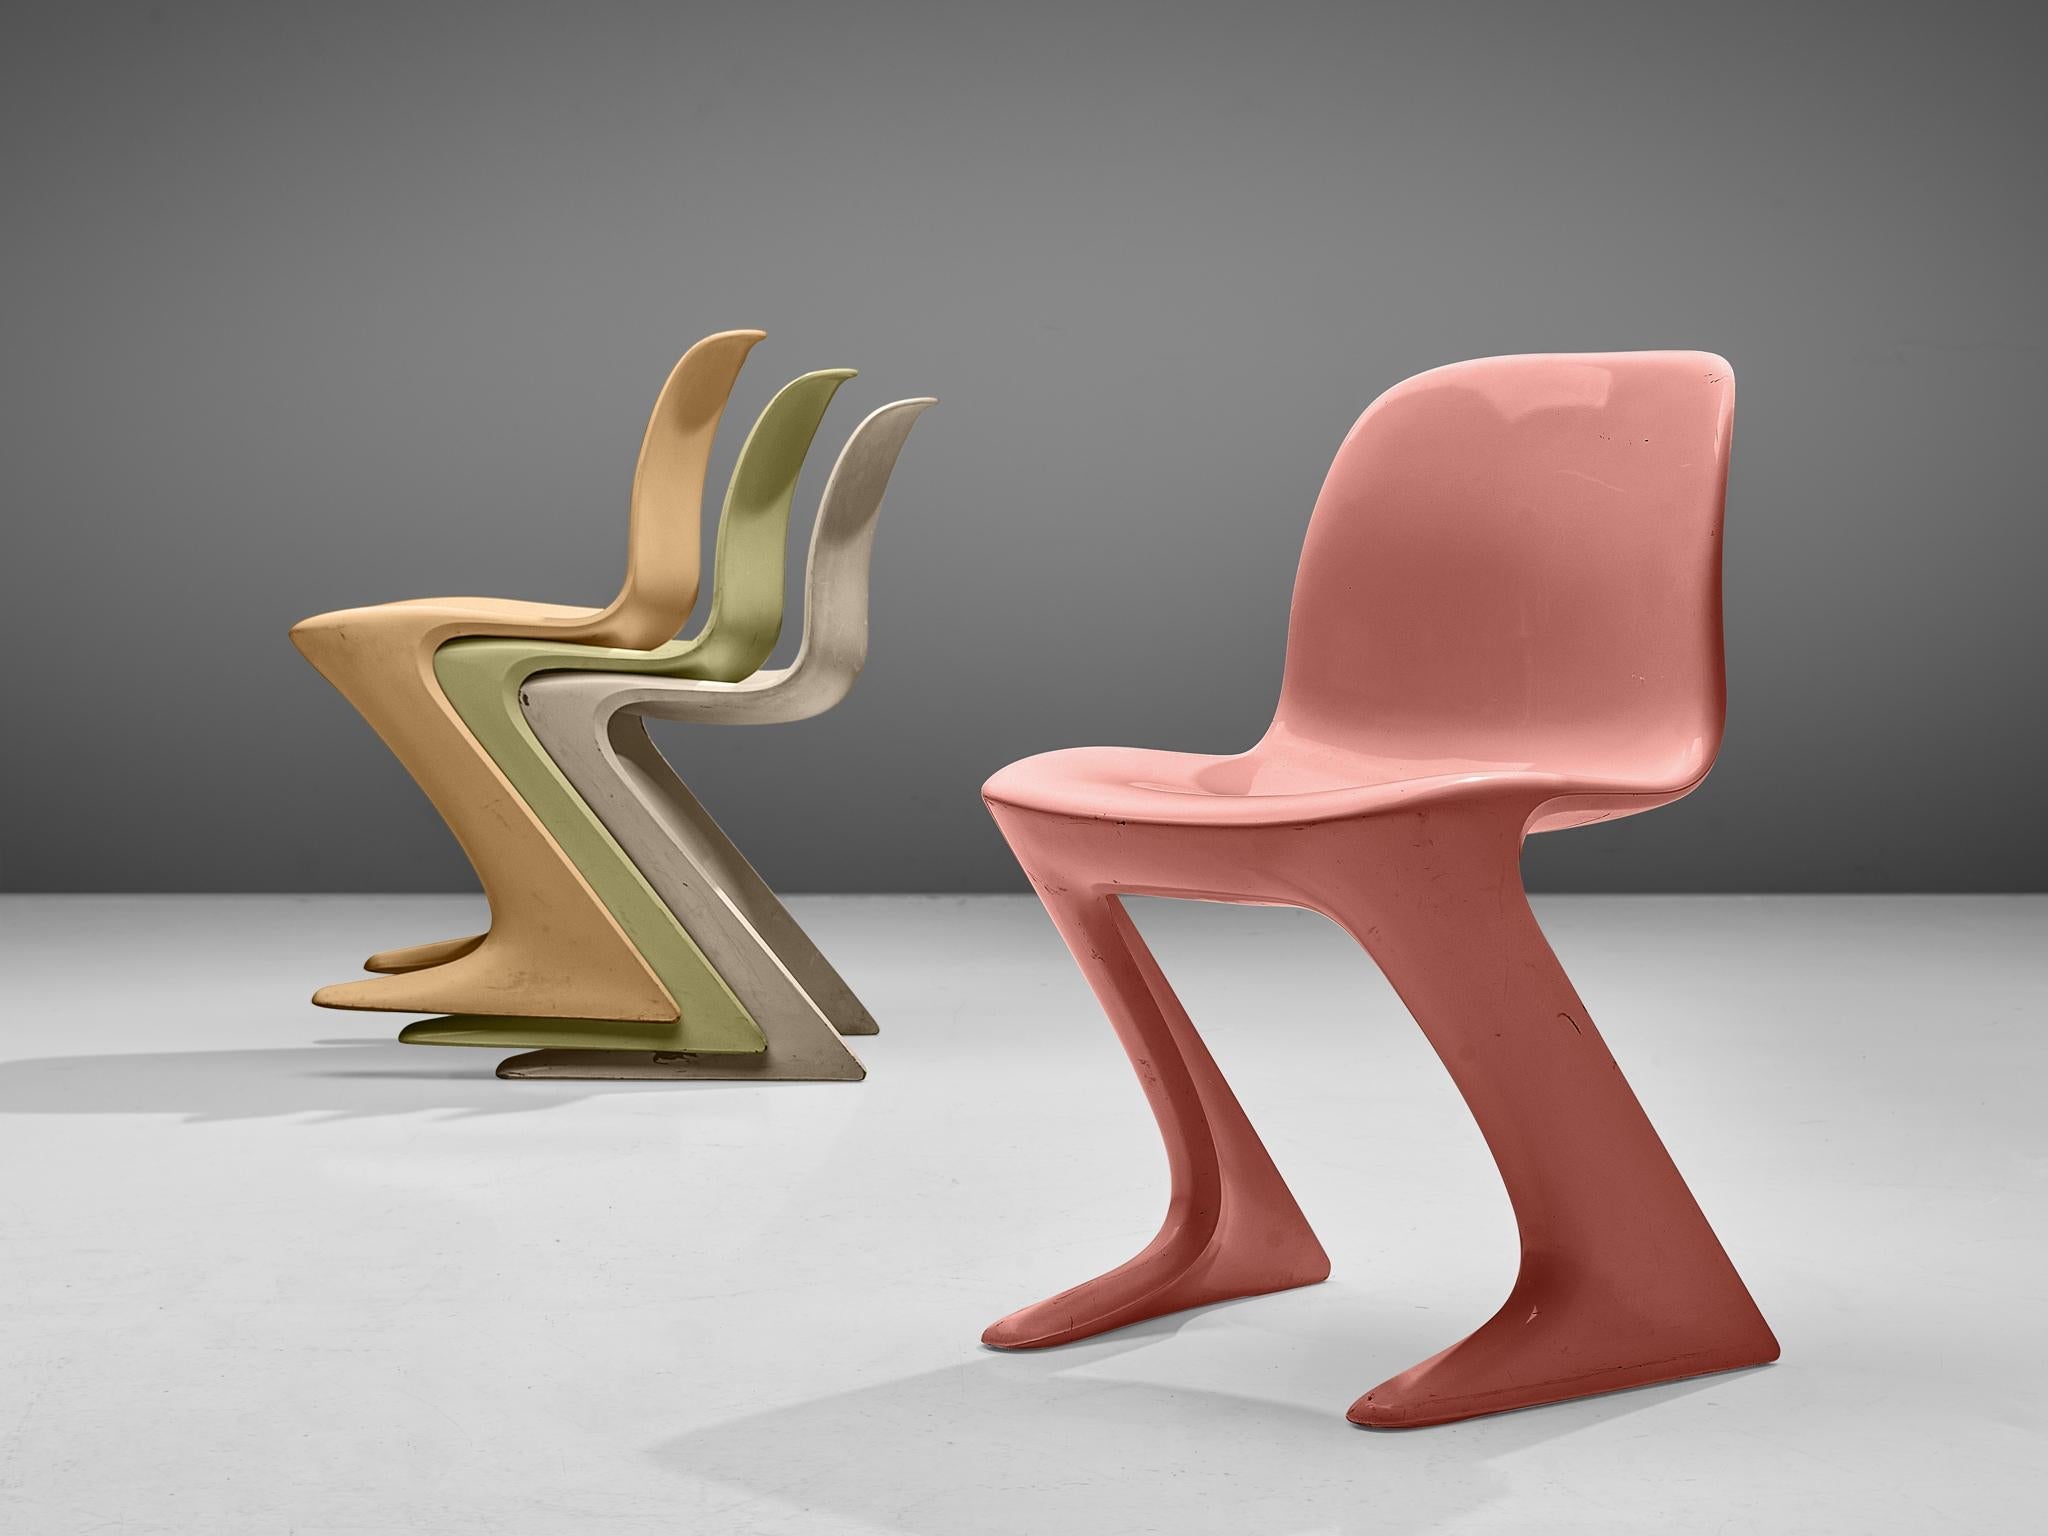 Ernst Moeckl Set of Eight Colorful 'Kangaroo' Chairs